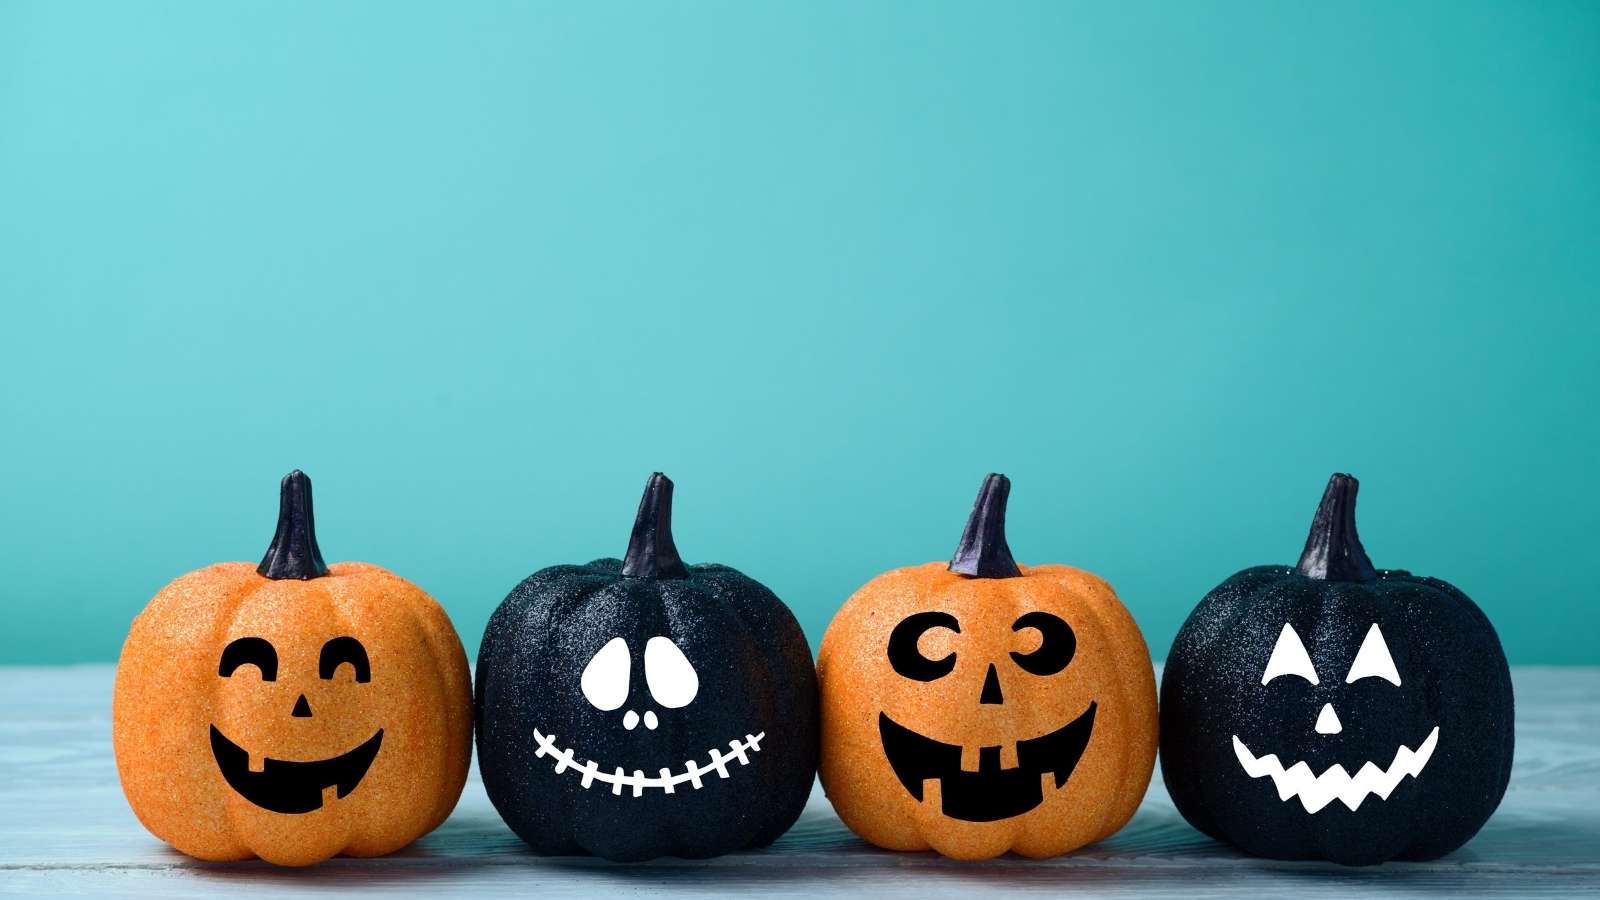 How to create a spooktacular Halloween campaign